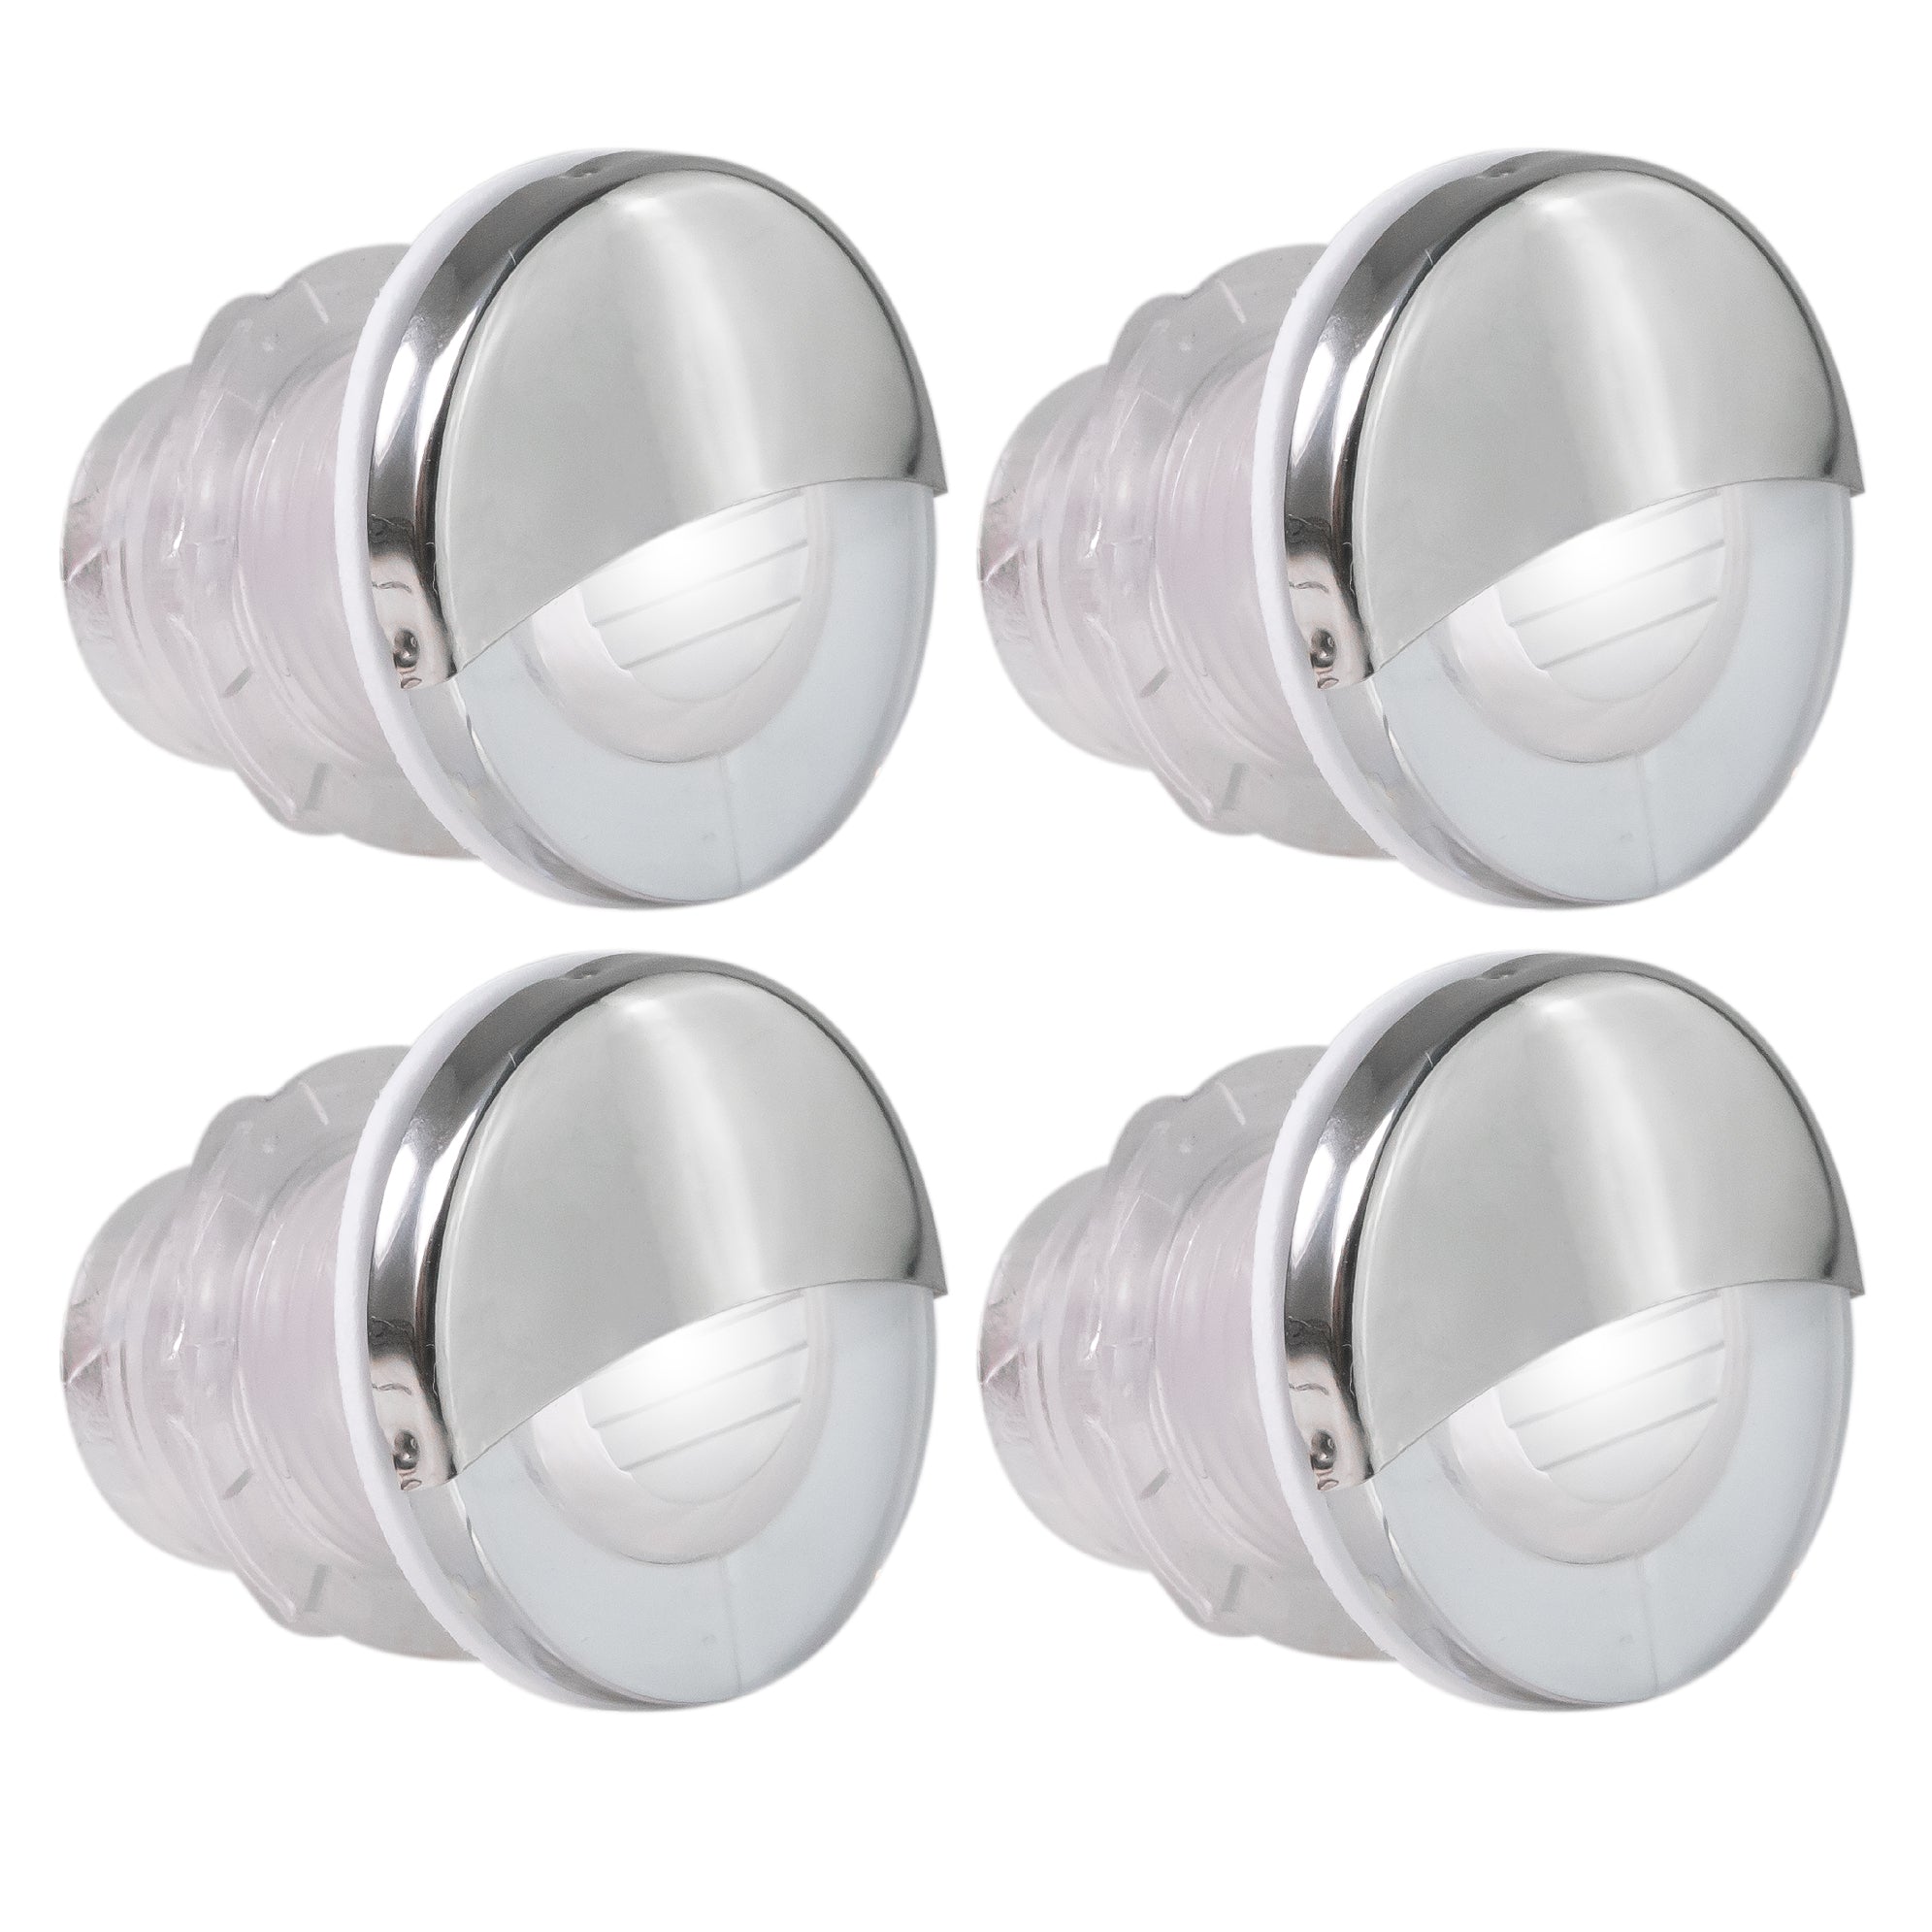 Livewell Courtesy Light, Round Accent, White LED, 4-Pack - FO4598-M4